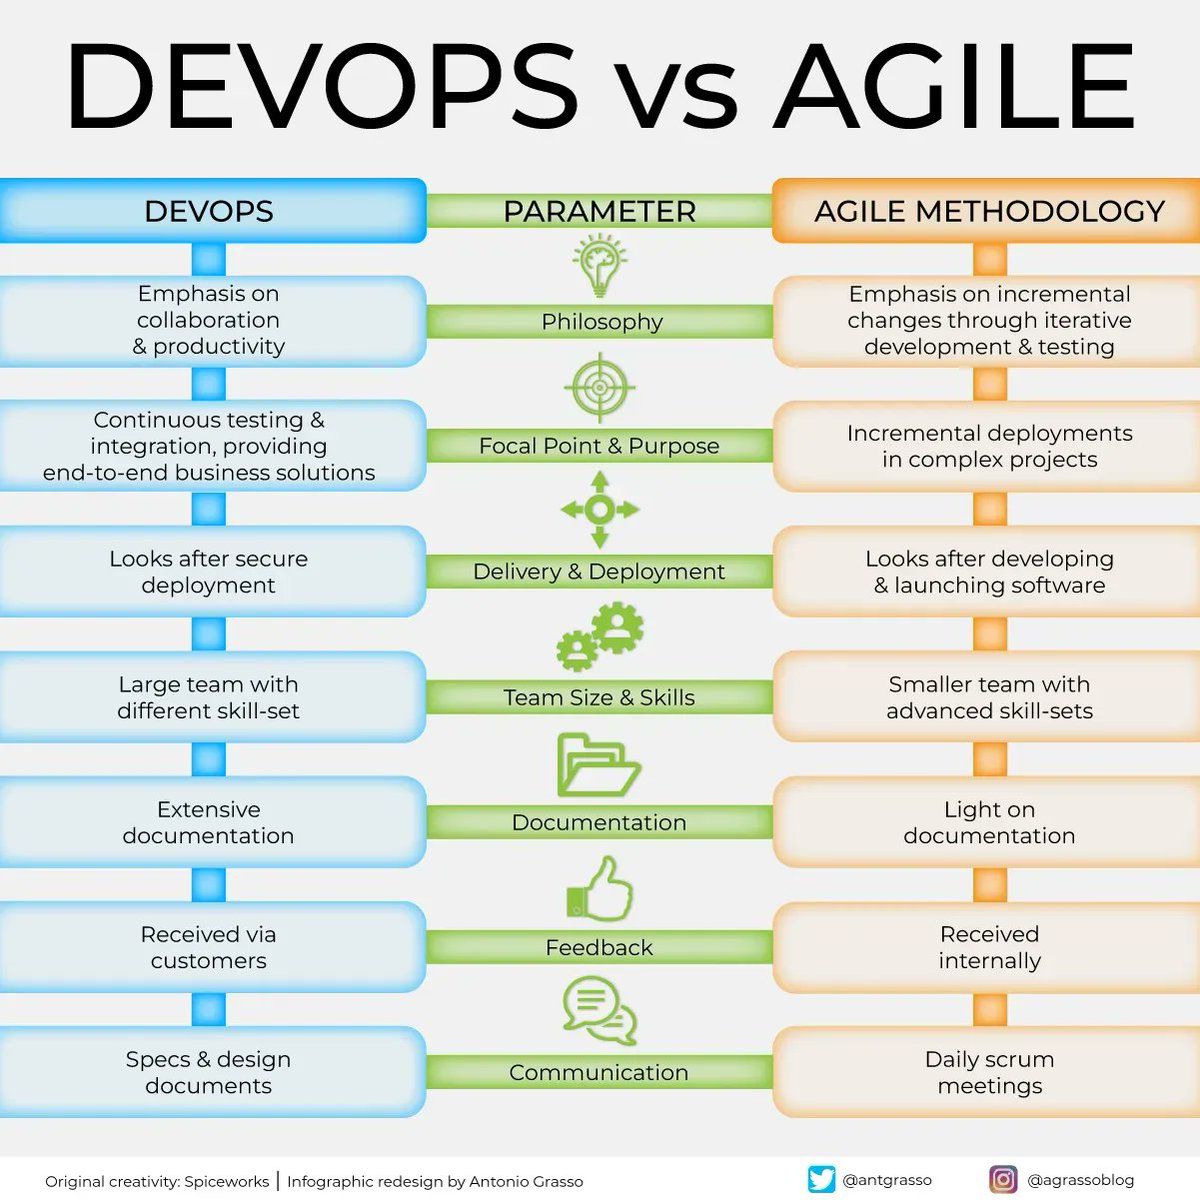 Whether you are in the role of a Chief Information Officer (CIO) or an Information Technology (IT) professional, understanding the key differences between DevOps and AGILE software development methodologies can be highly beneficial.

#DevOps #Agile #Software #IT #CIO